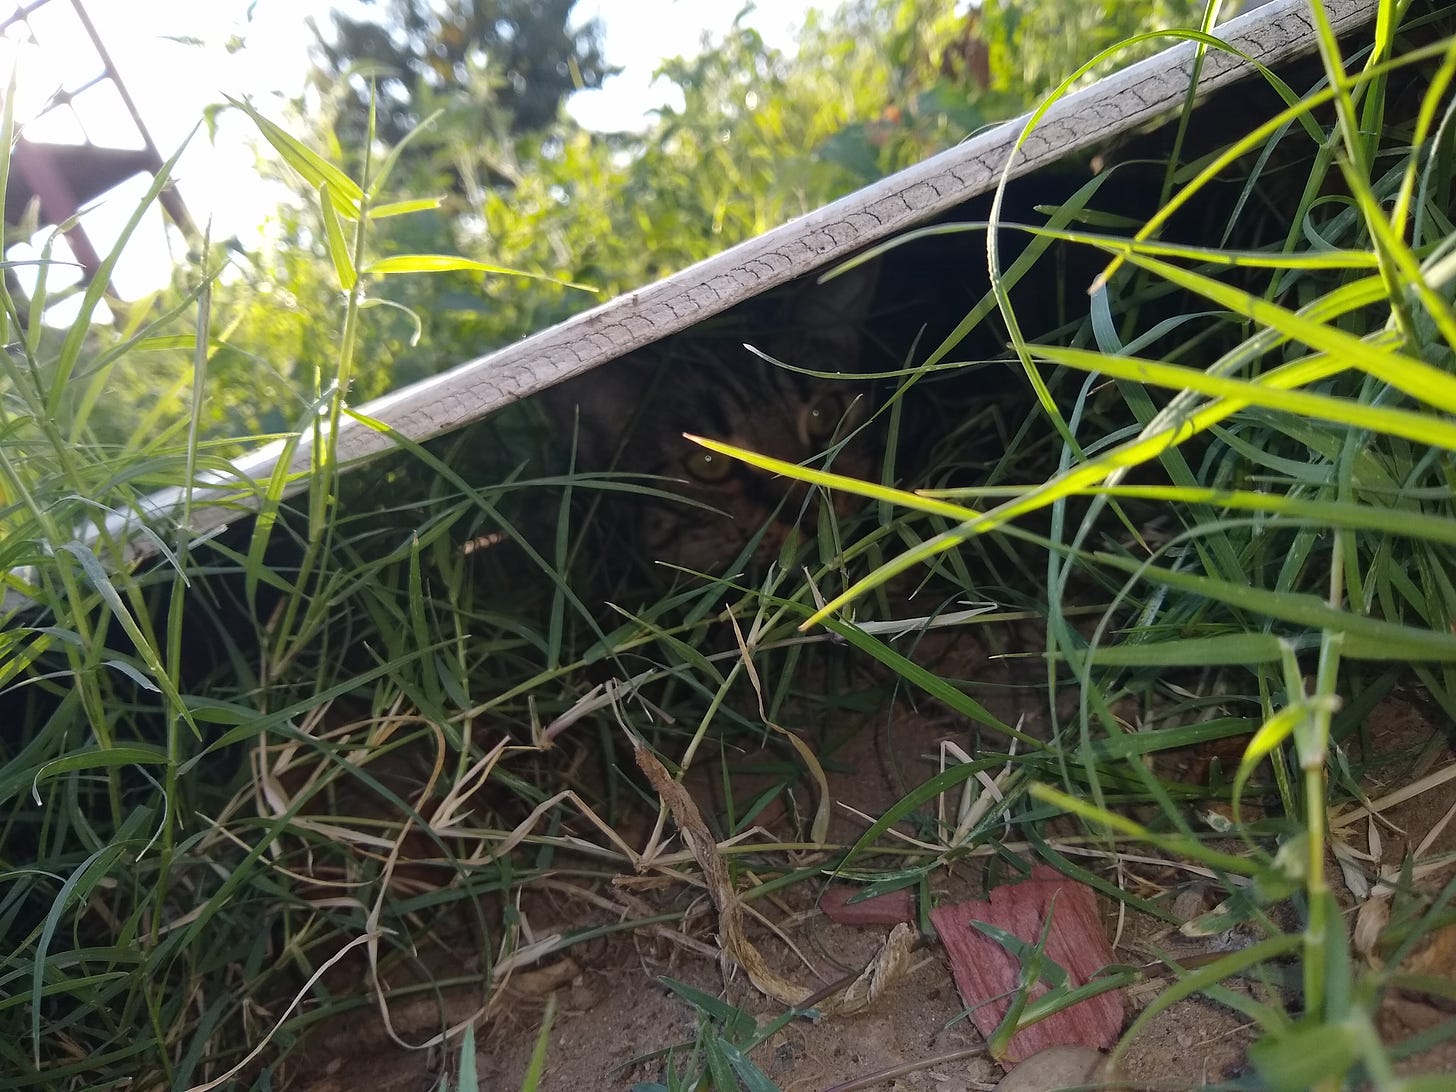 a cat hiding in the weeds